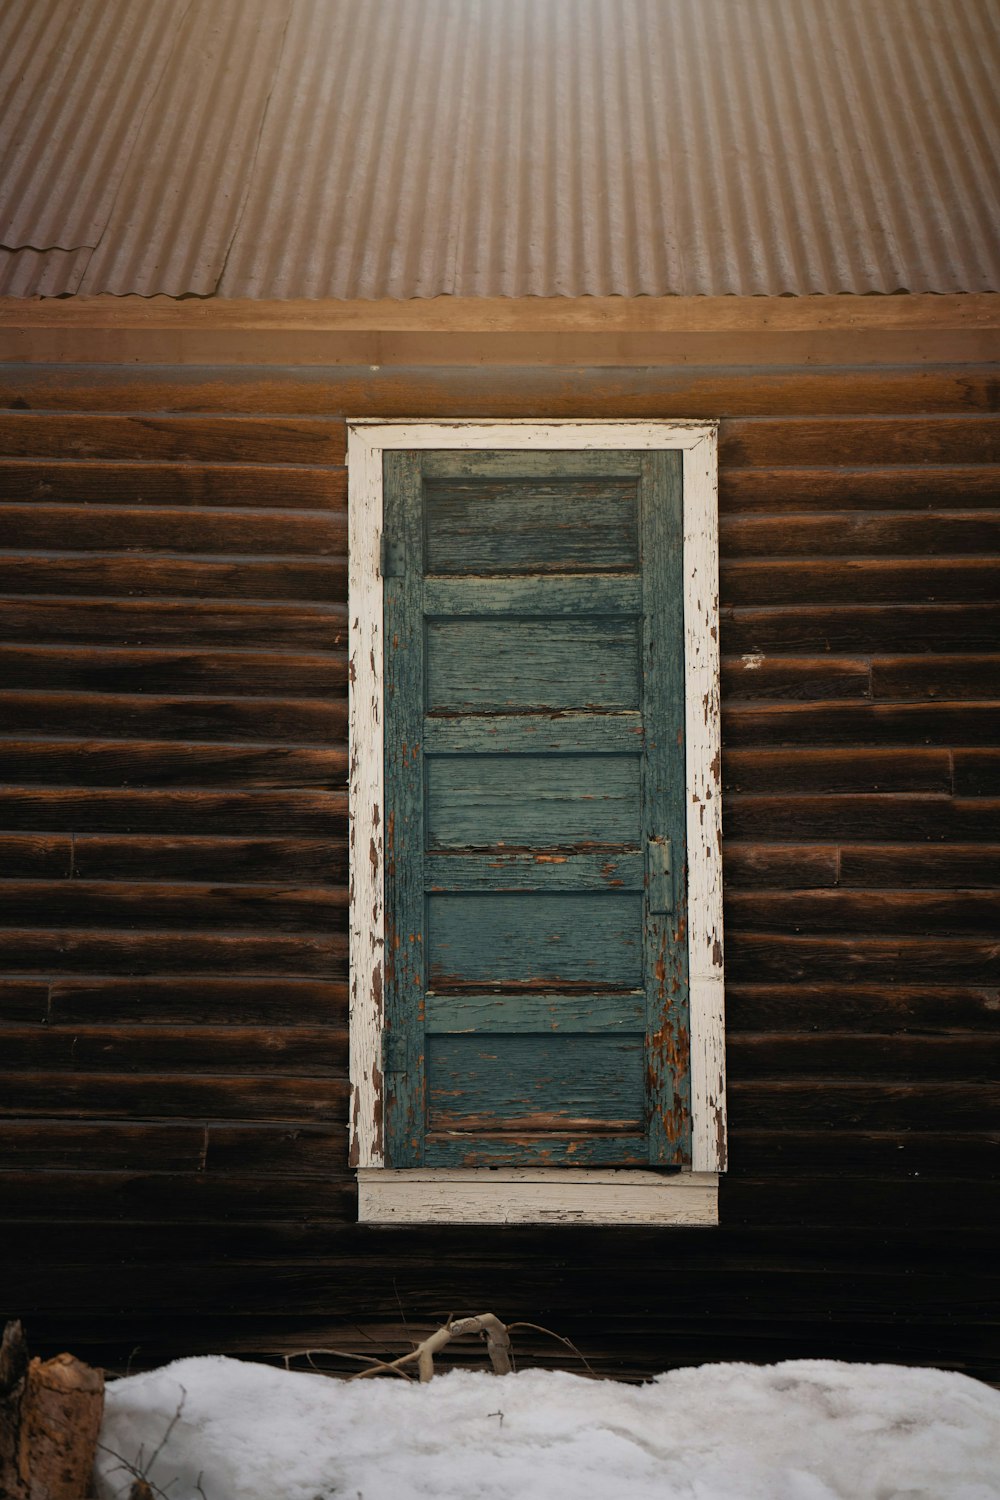 a window in a wooden building